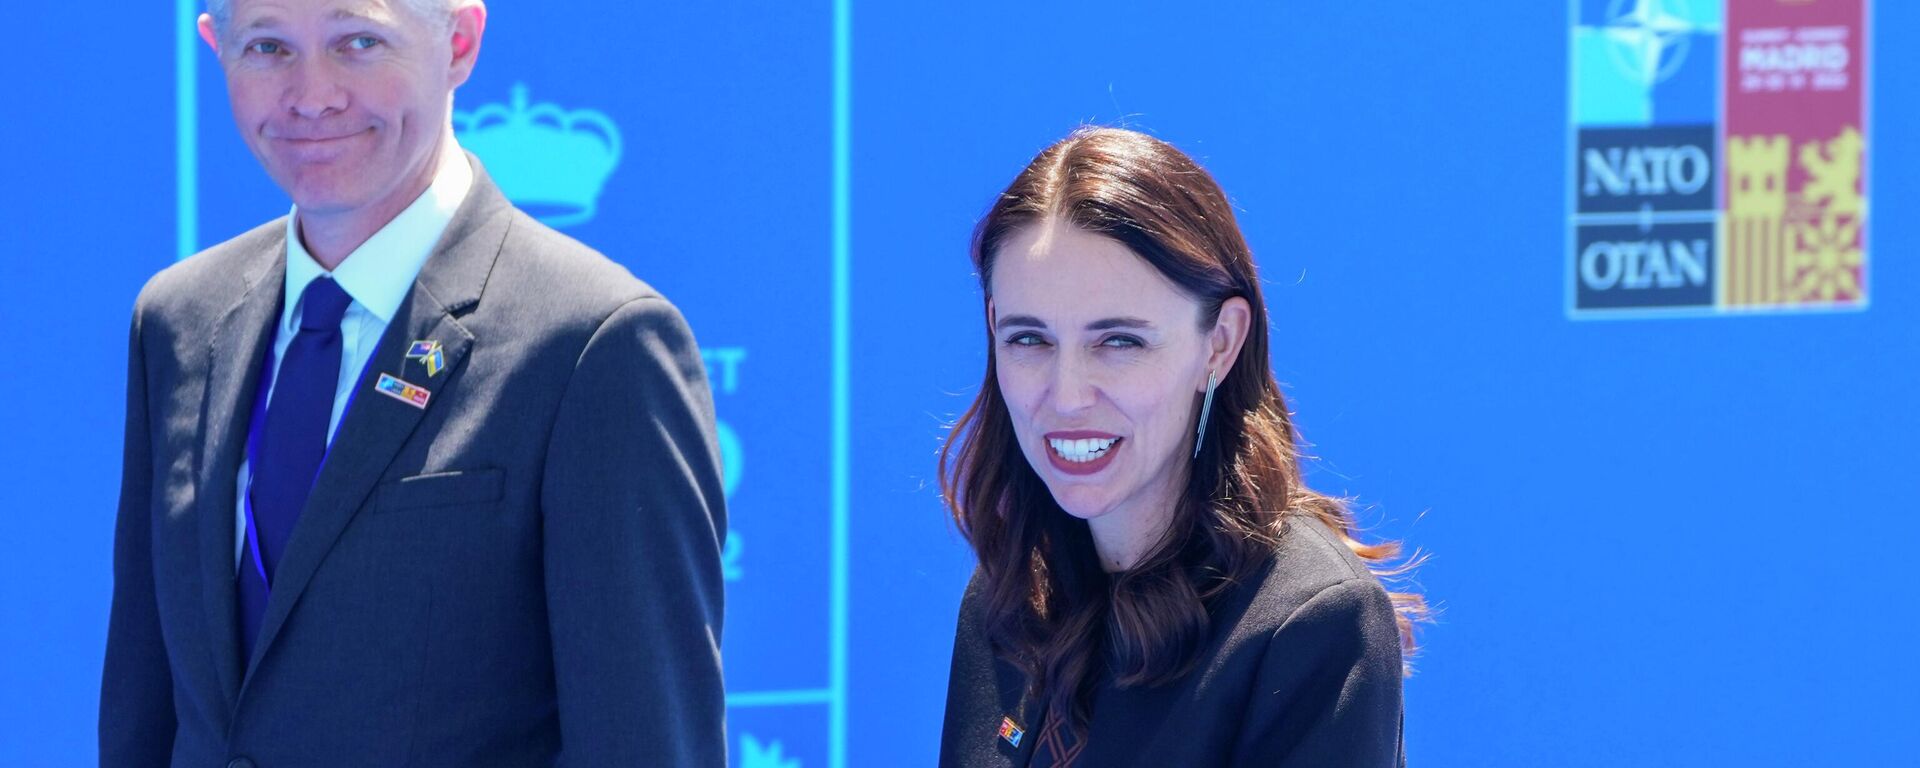 New Zealand's Prime Minister Jacinda Ardern arrives for the NATO summit in Madrid, Spain, on Wednesday, June 29, 2022. North Atlantic Treaty Organization heads of state will meet for a NATO summit in Madrid from Tuesday through Thursday. - Sputnik International, 1920, 30.06.2022